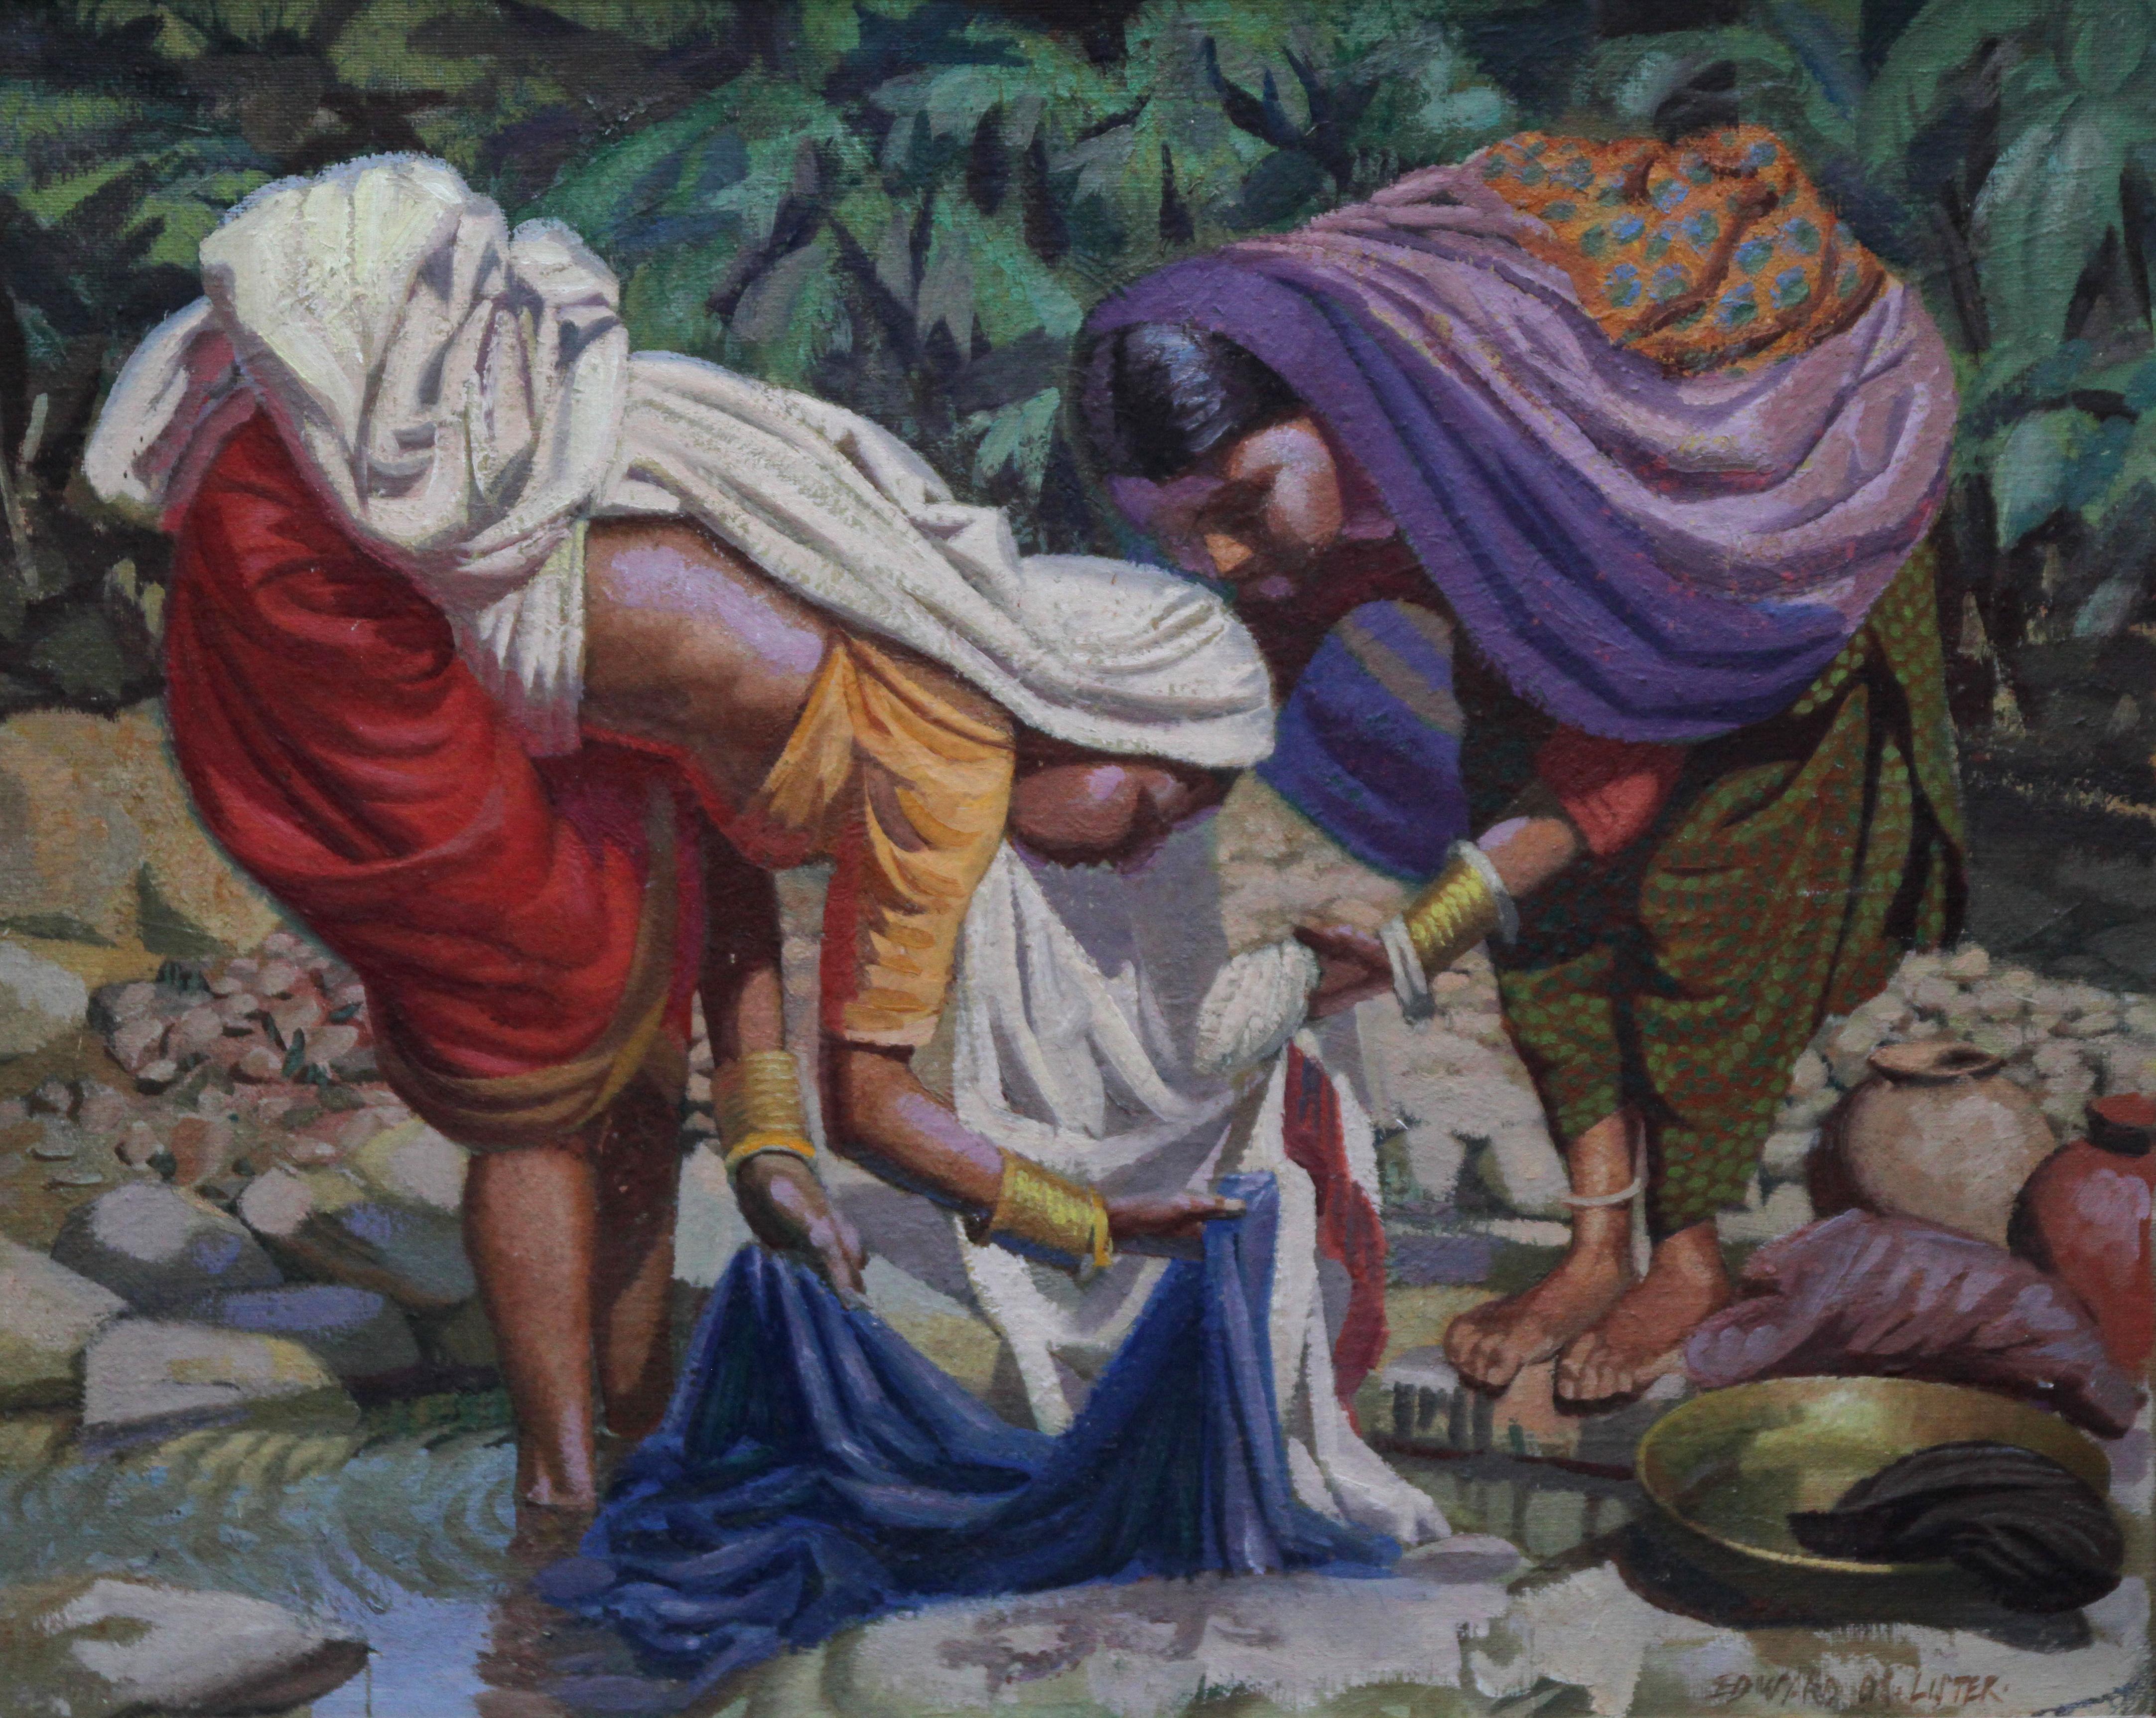 Wash Day - India - British 50's art Post Impressionist portrait oil painting  - Painting by Edward D'Arcy Lister